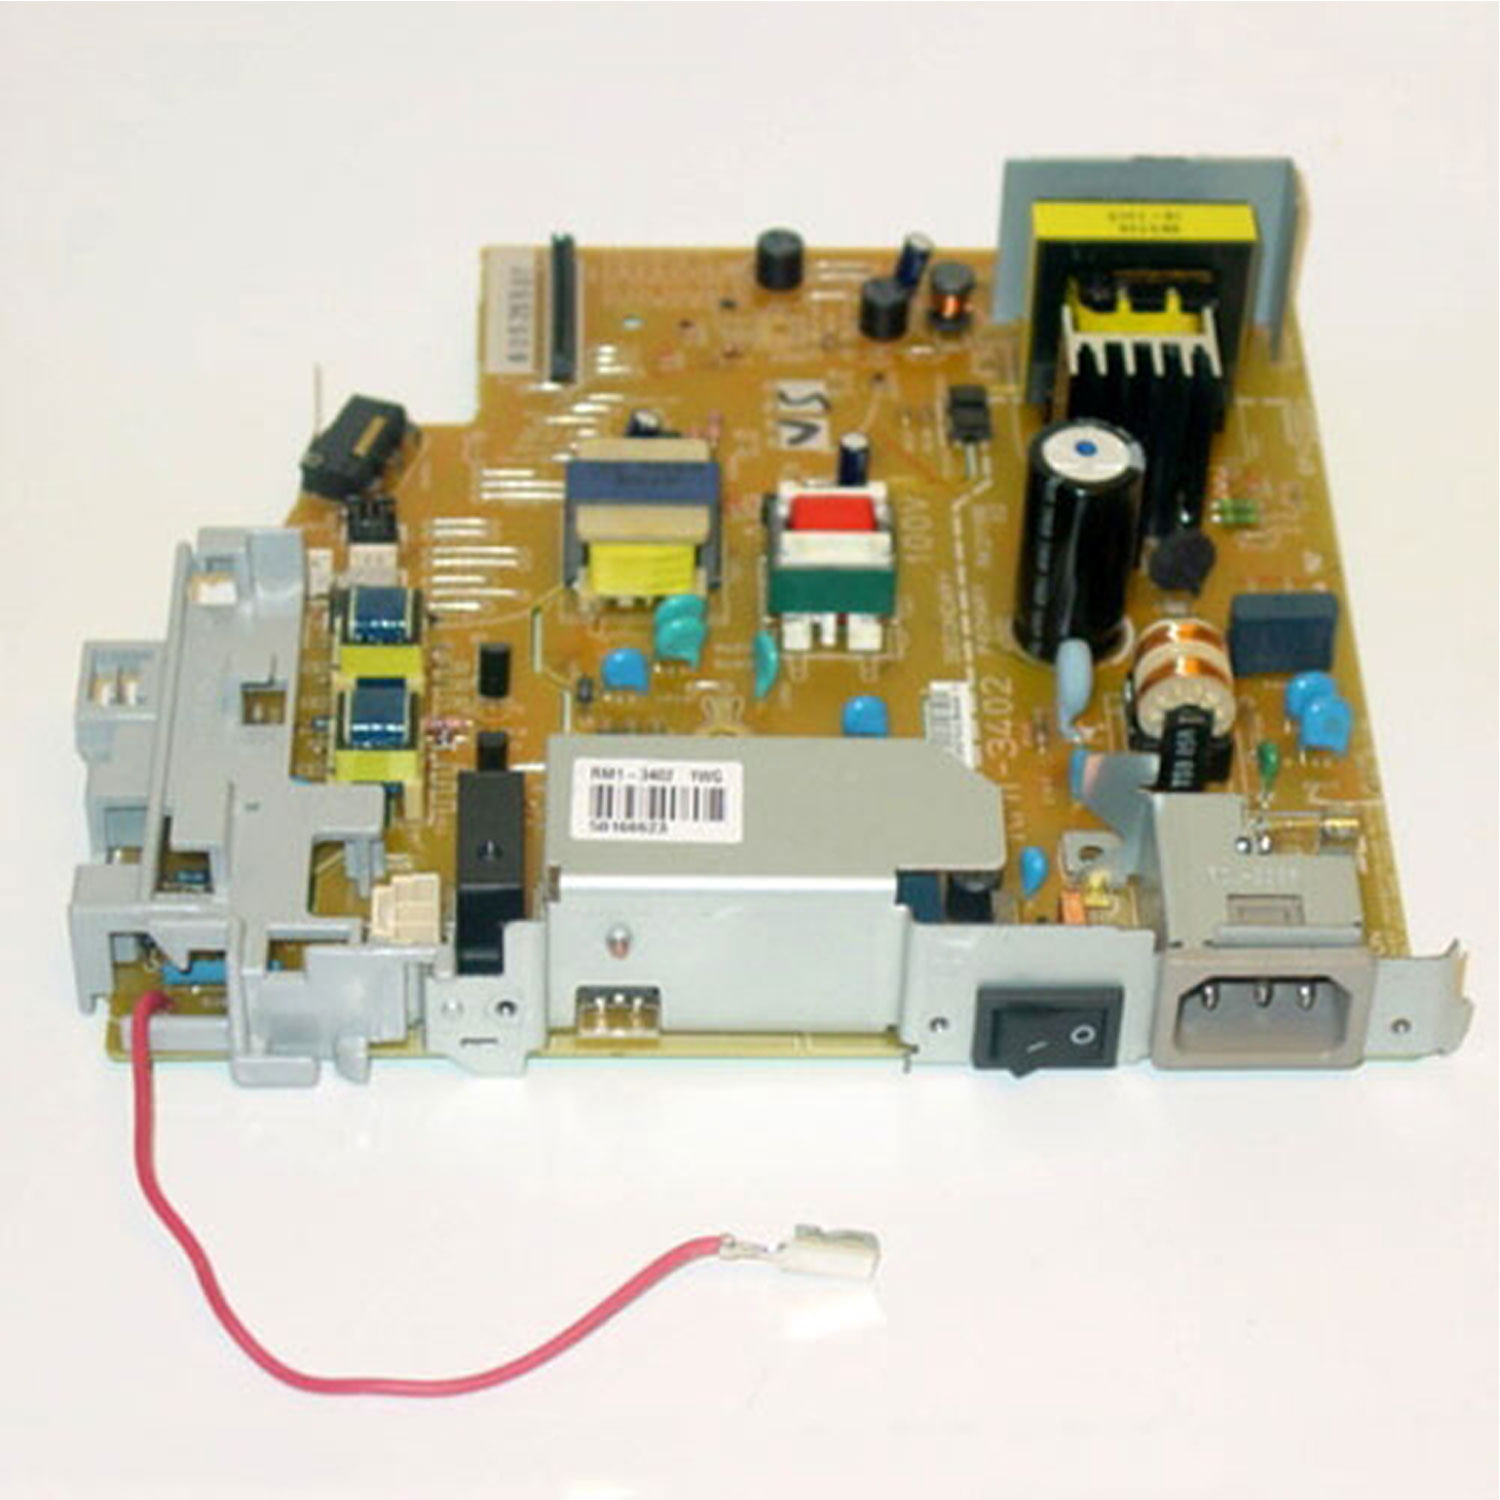 Hp M1005 POWER SUPPLY OLD MODEL WITH STR for HP M1005 PRINTER